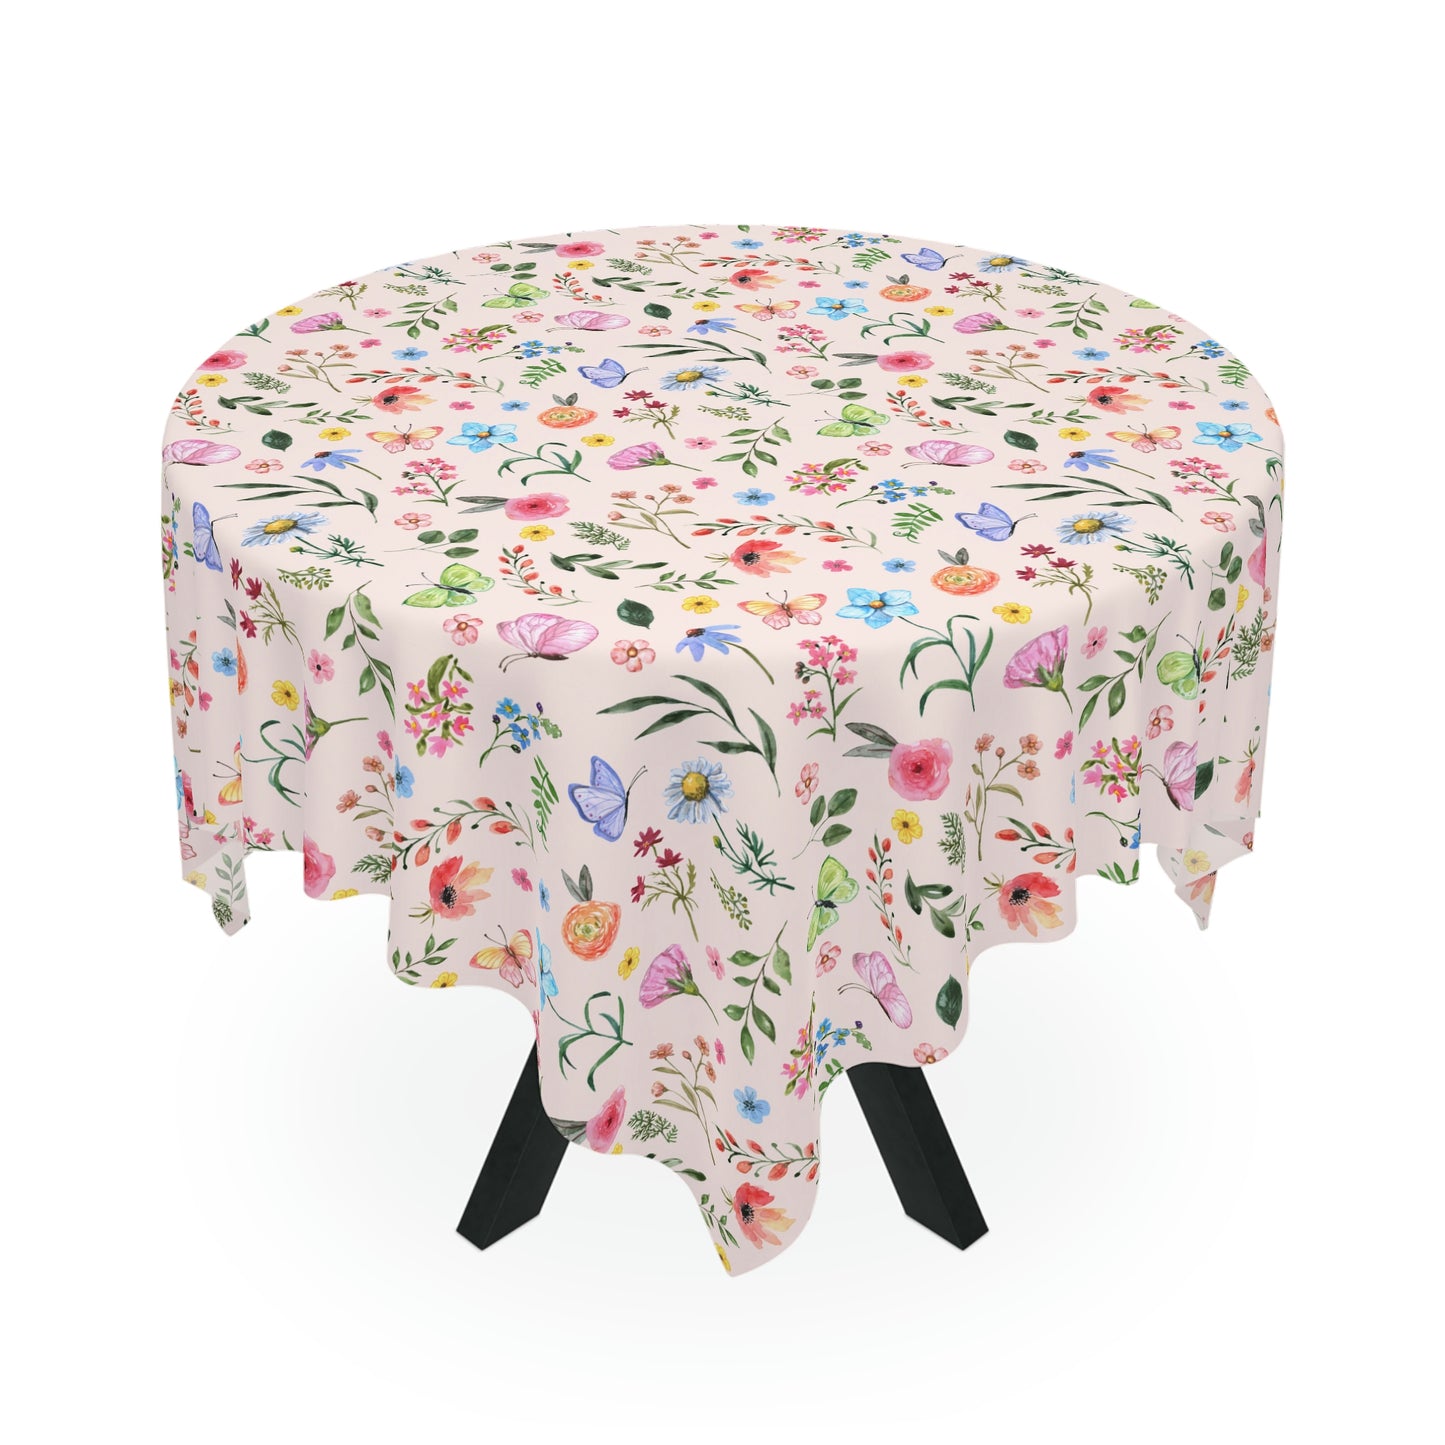 Spring Daisies and Butterflies Tablecloth